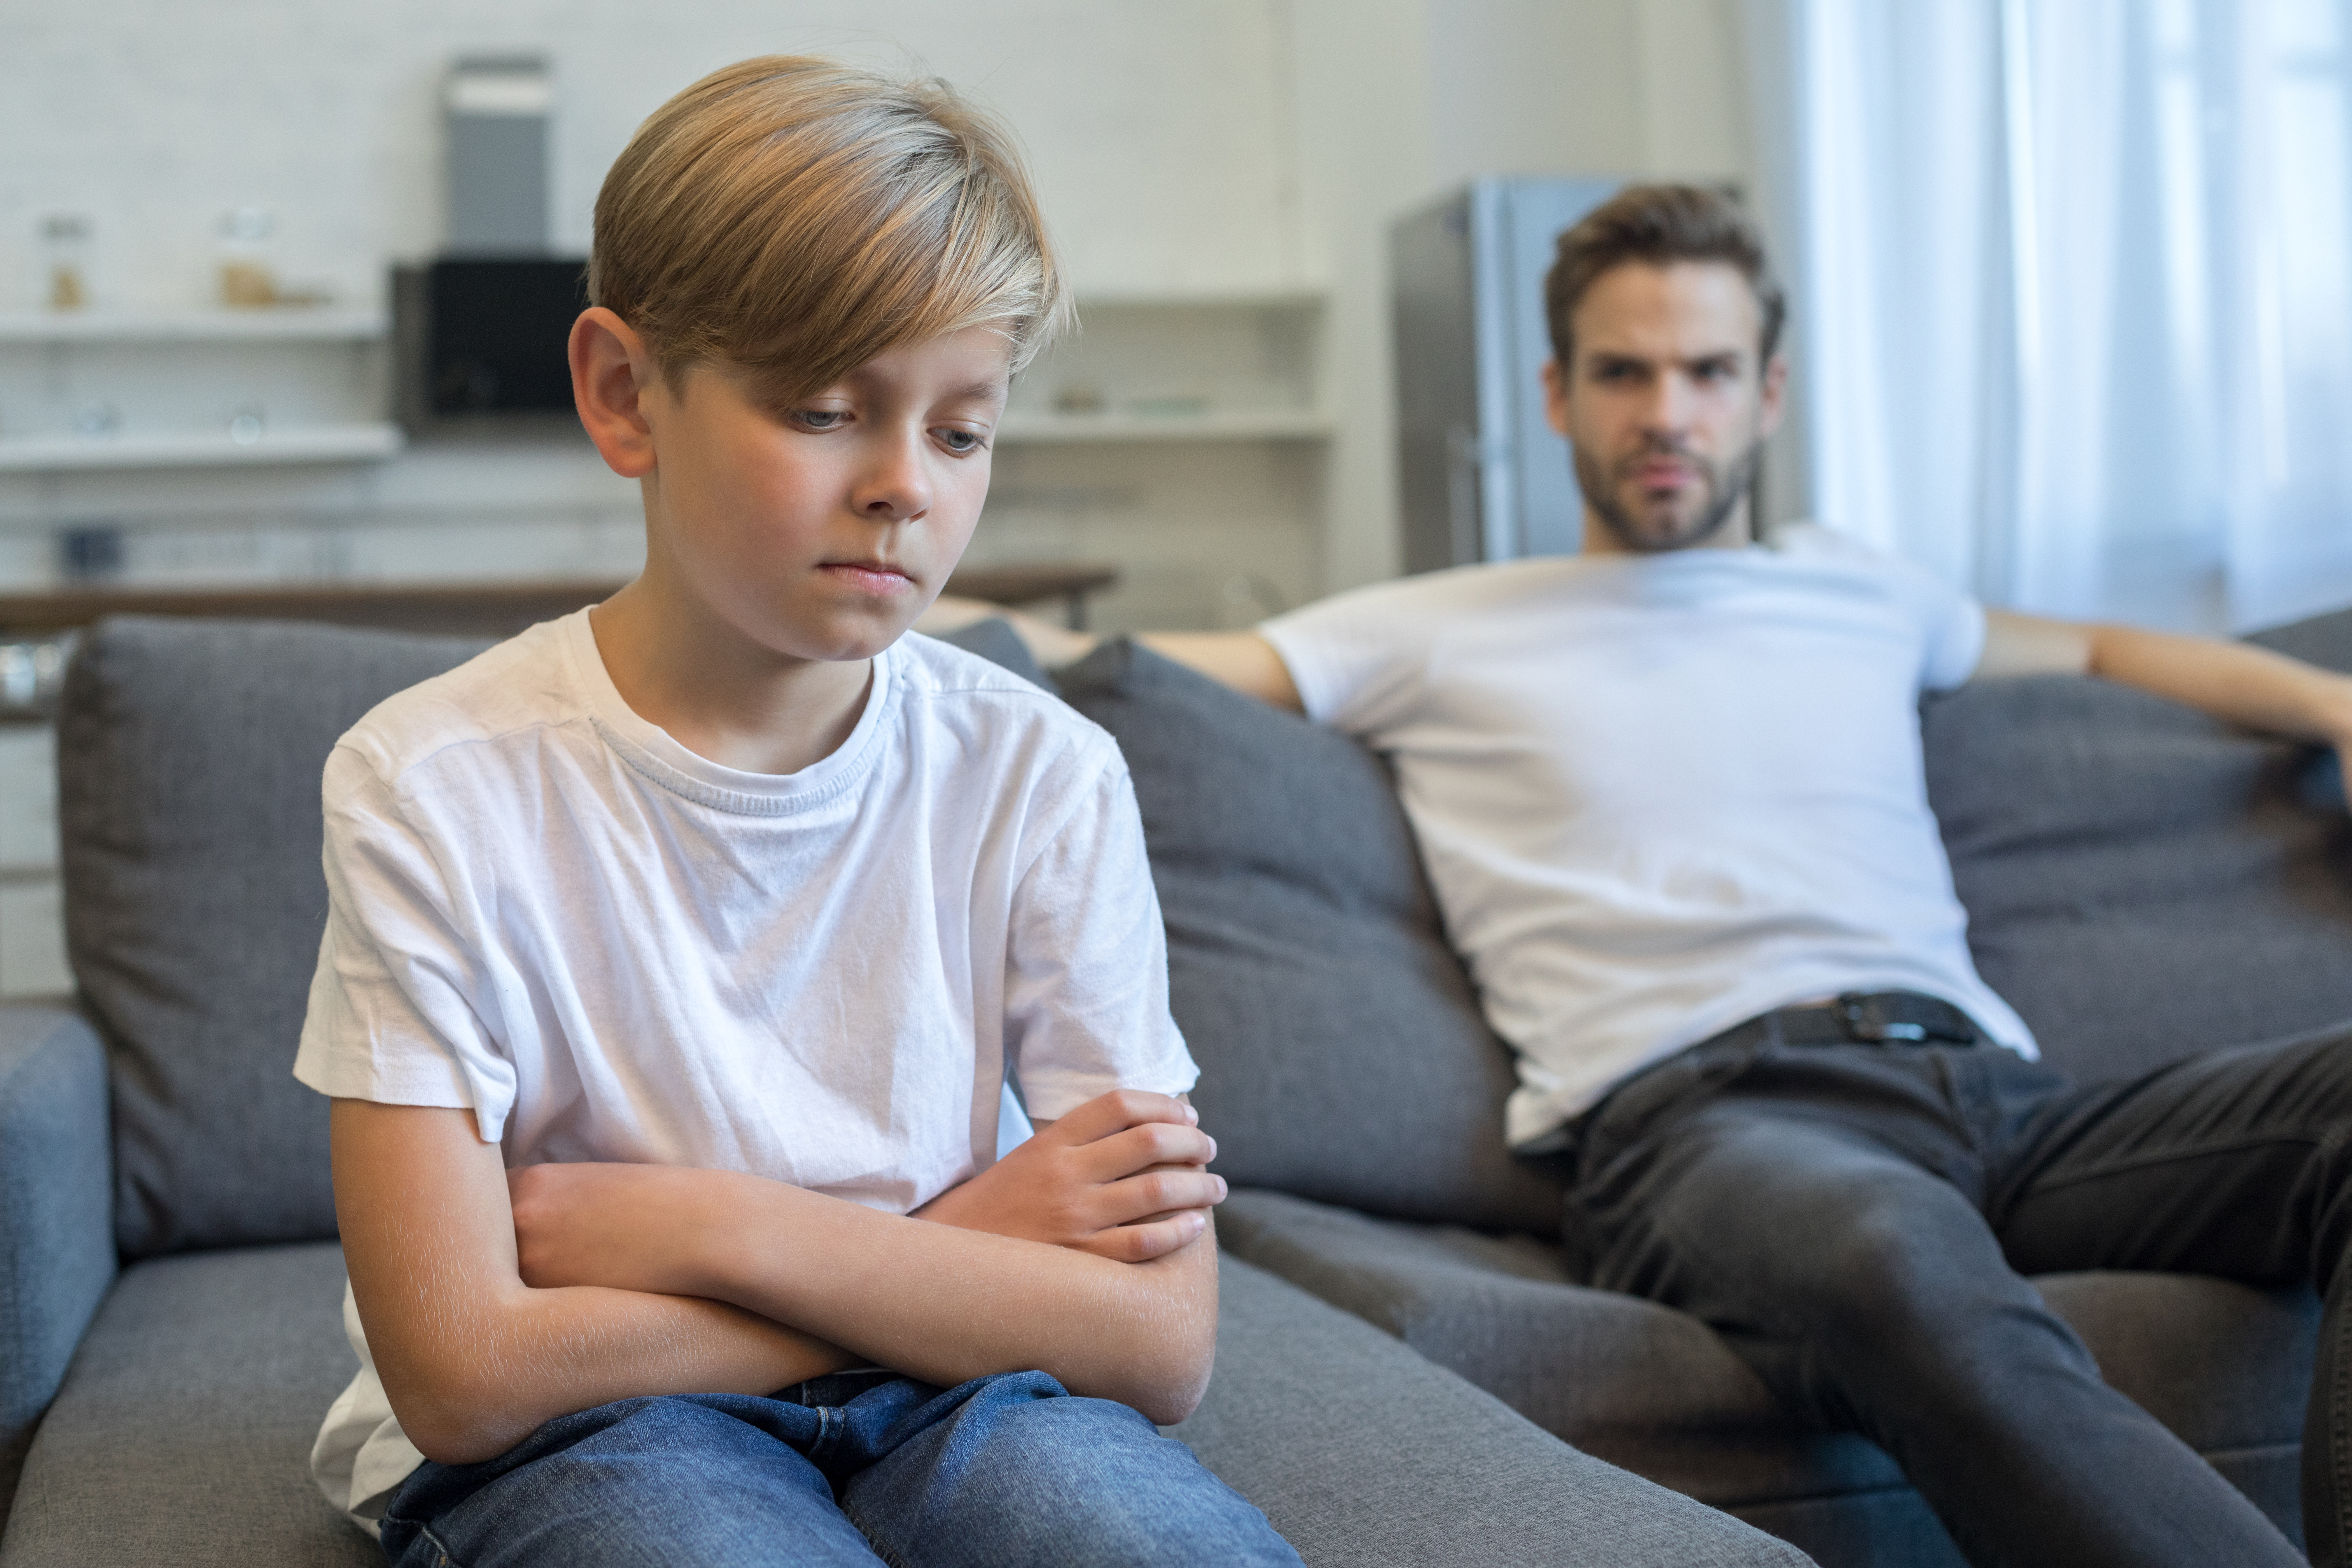 Sad and bored child at home couch feeling frustrated | Source: Getty Images